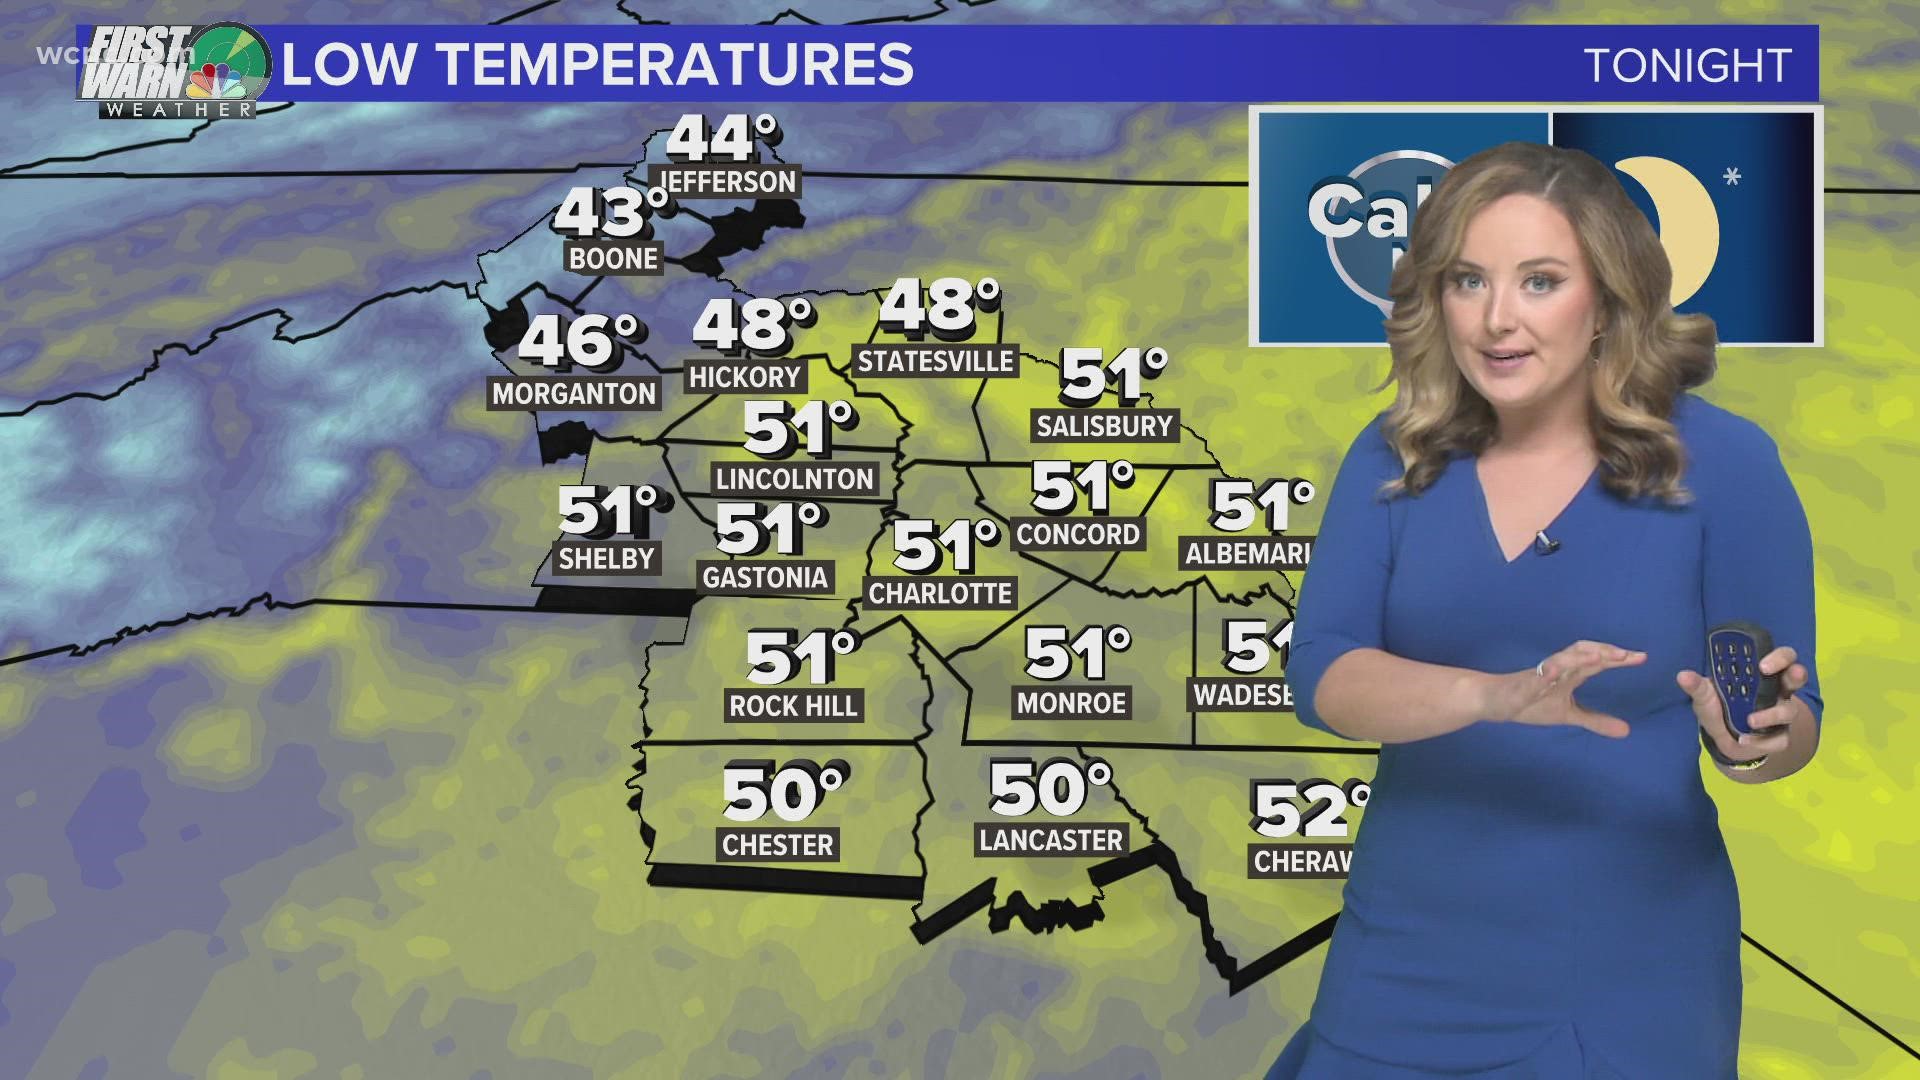 Meteorologist Brittany Van Voorhees is tracking cooler temperatures tomorrow behind a cold front. She'll show you how long this trend lasts.